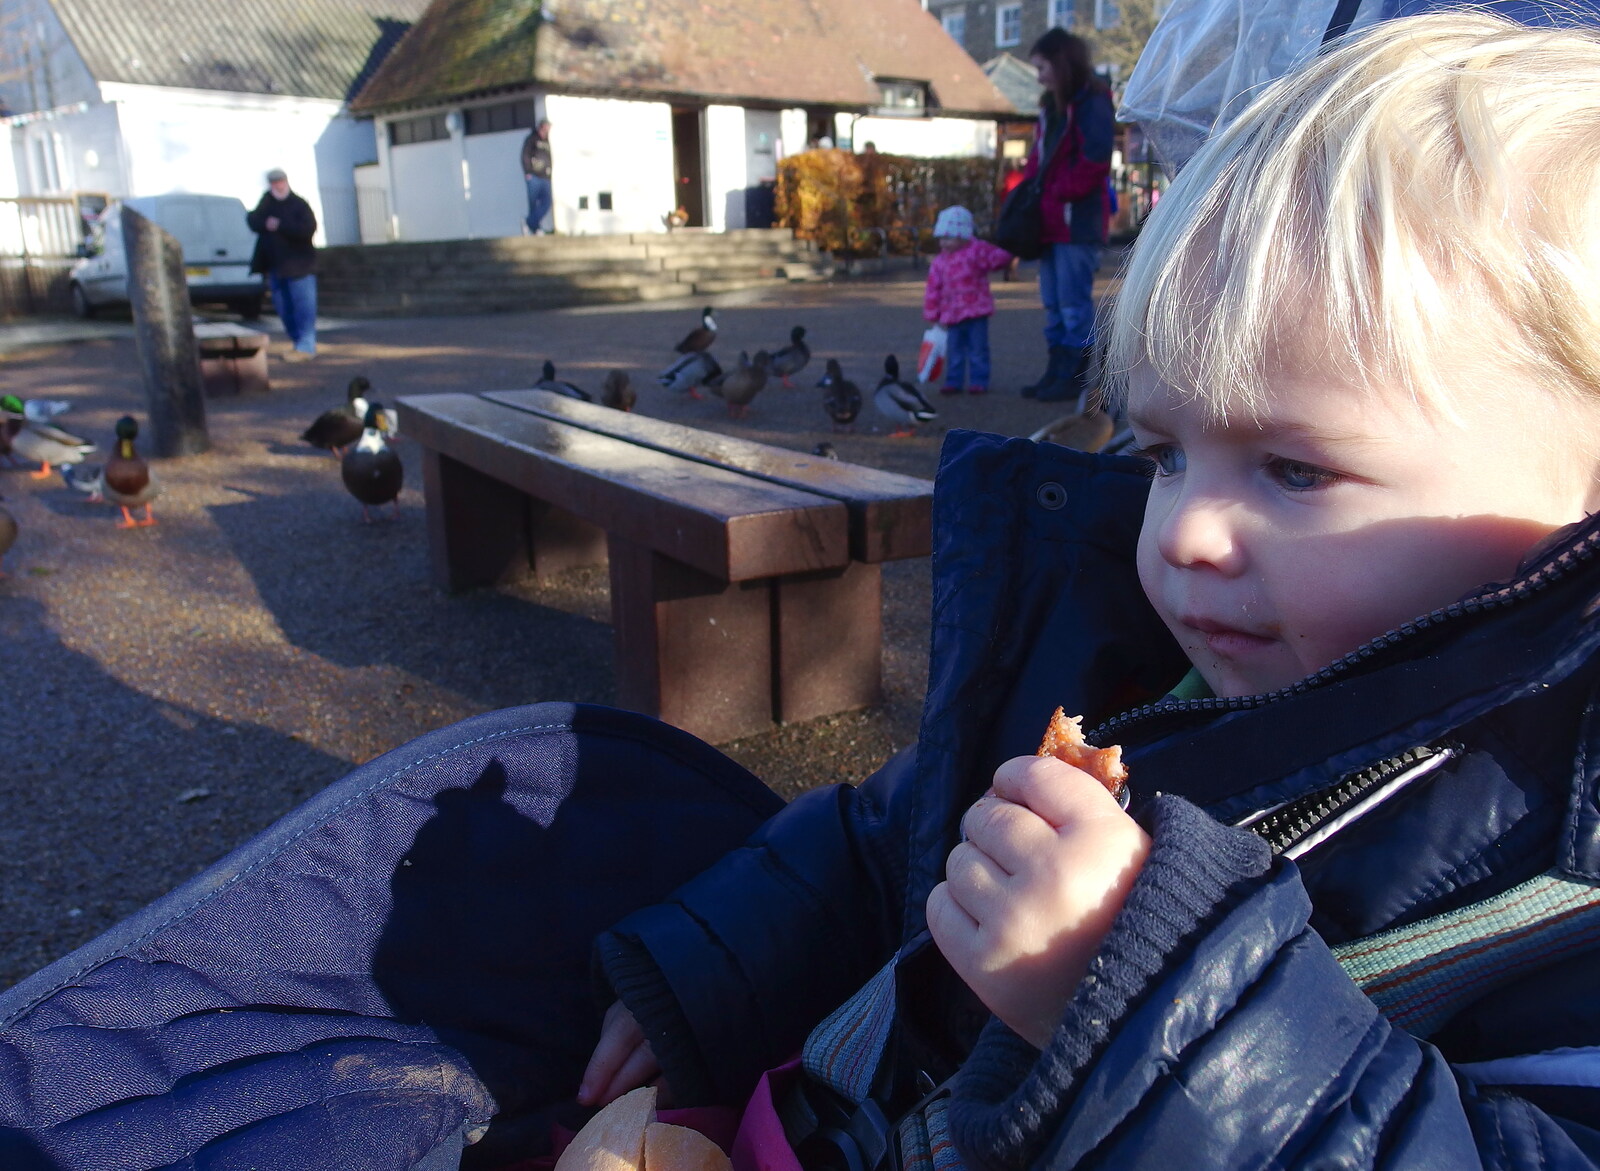 More Building and Palgrave Playground, Suffolk - 24th November 2013: Harry eats sausage by the Mere